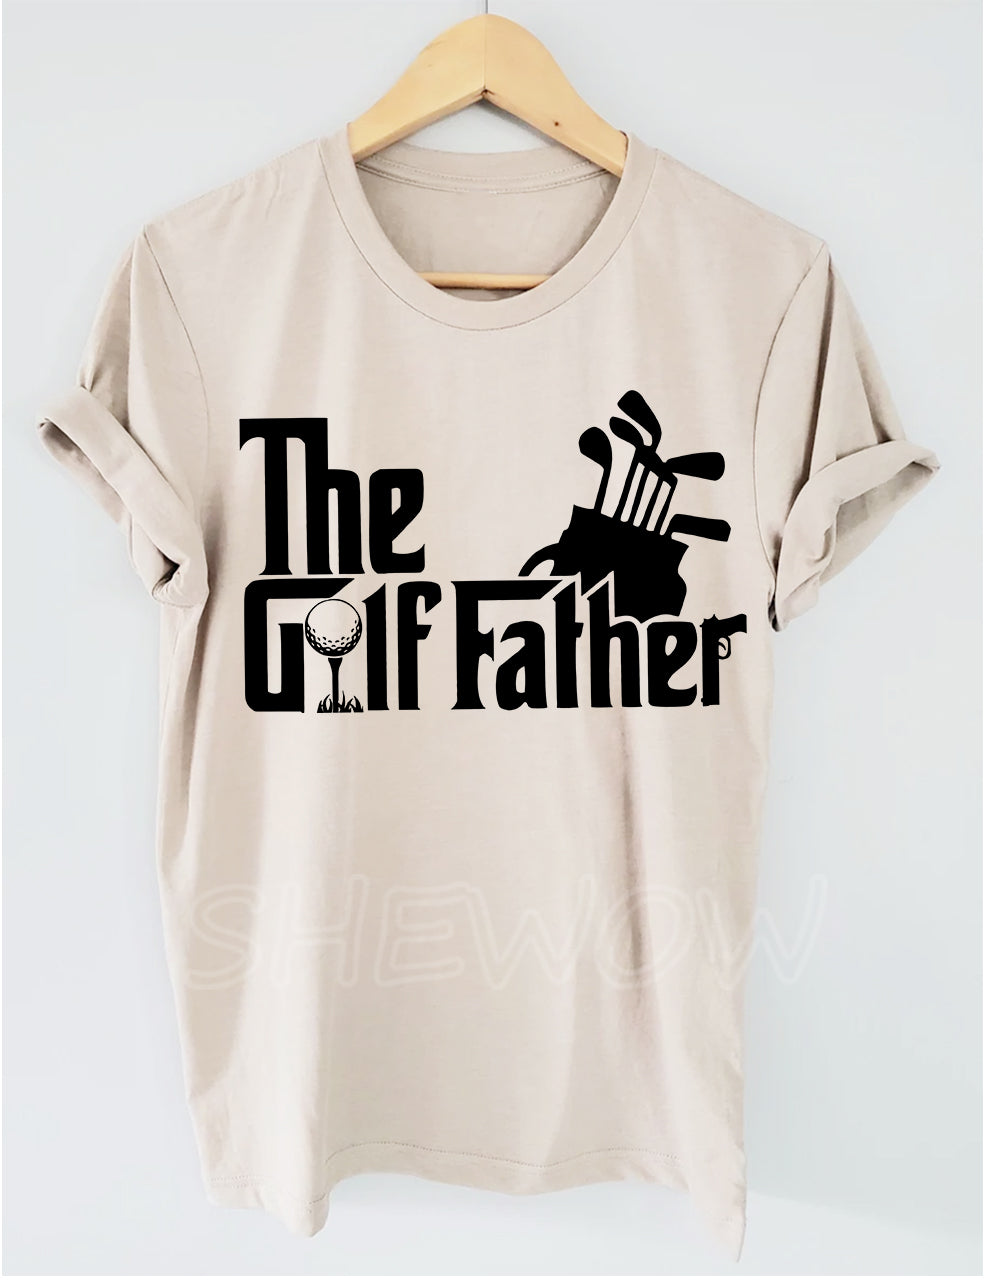 The Golf Father T-shirt